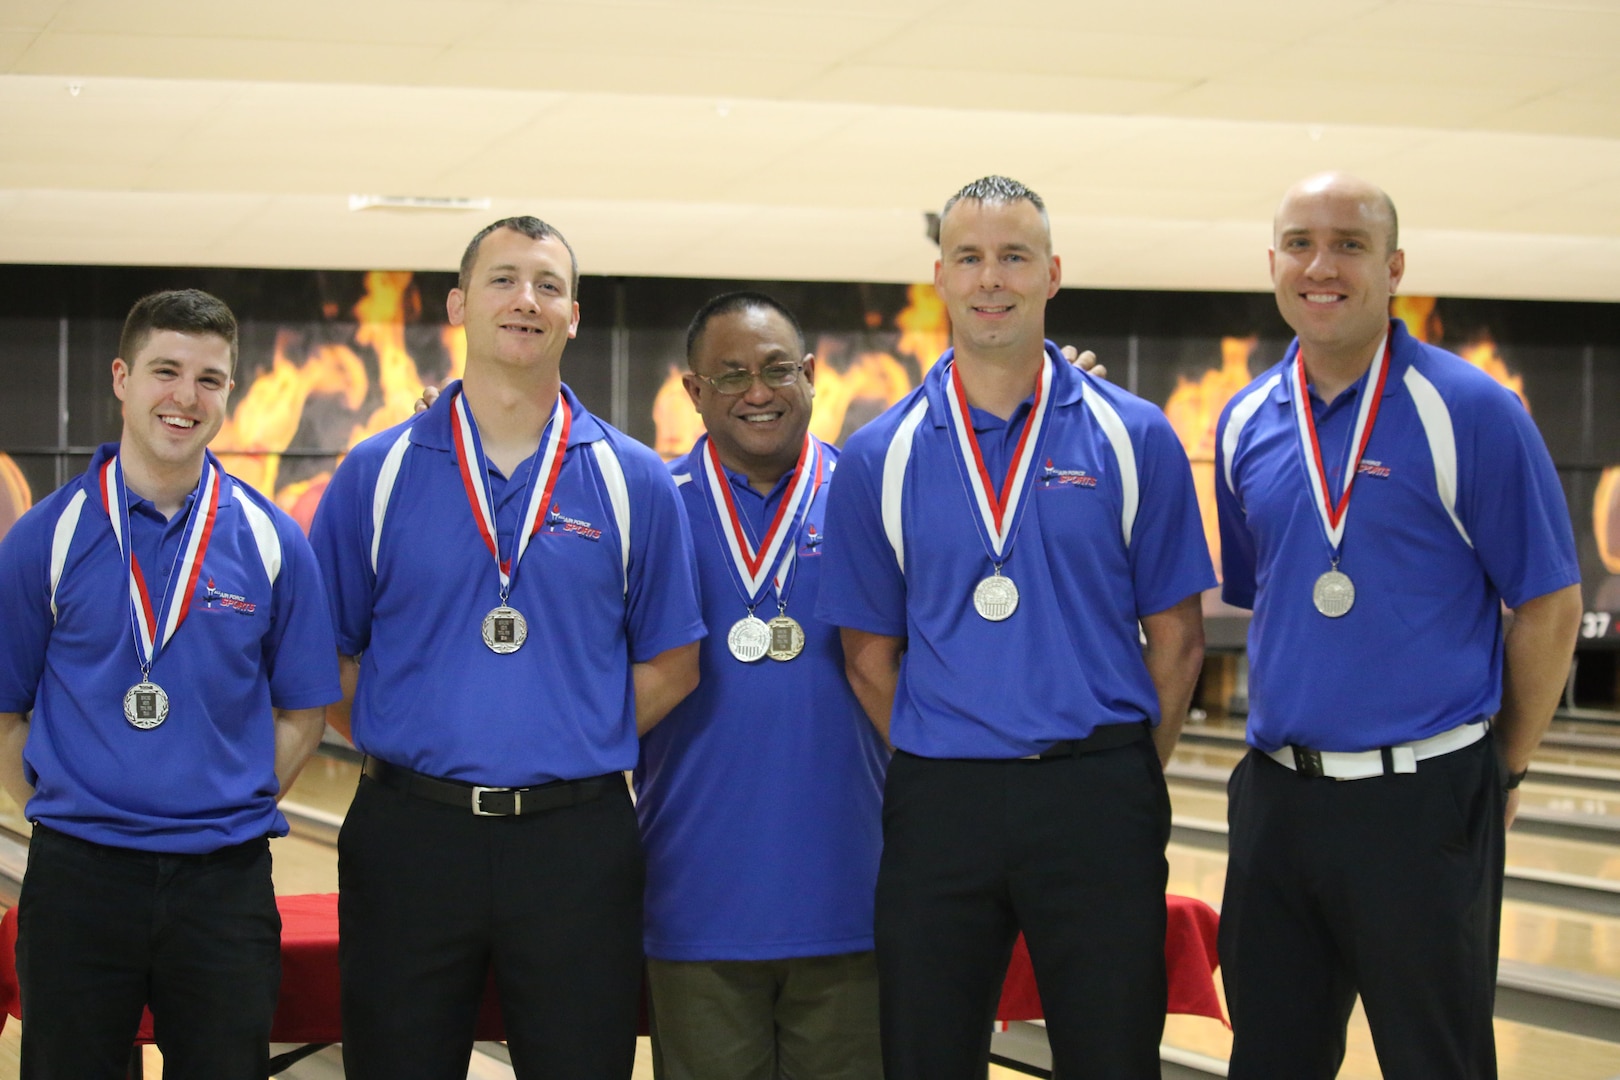 Air Force Men take Team Silver at the 2017 Armed Forces Bowling Championship hosted at Marine Corps Base Camp Pendleton, California from 5-8 May at the Leatherneck Lanes. Picture here is: Tech. Sgt. Chuck Kropog, Yokota AB, Japan; Tech. Sgt. Hans Schnell, Peterson AFB, Colo.; Staff Sgt. James McTaggart, Nellis AFB, Neveda; Staff Sgt. Marshal Crider, Ramstein AB, Germany